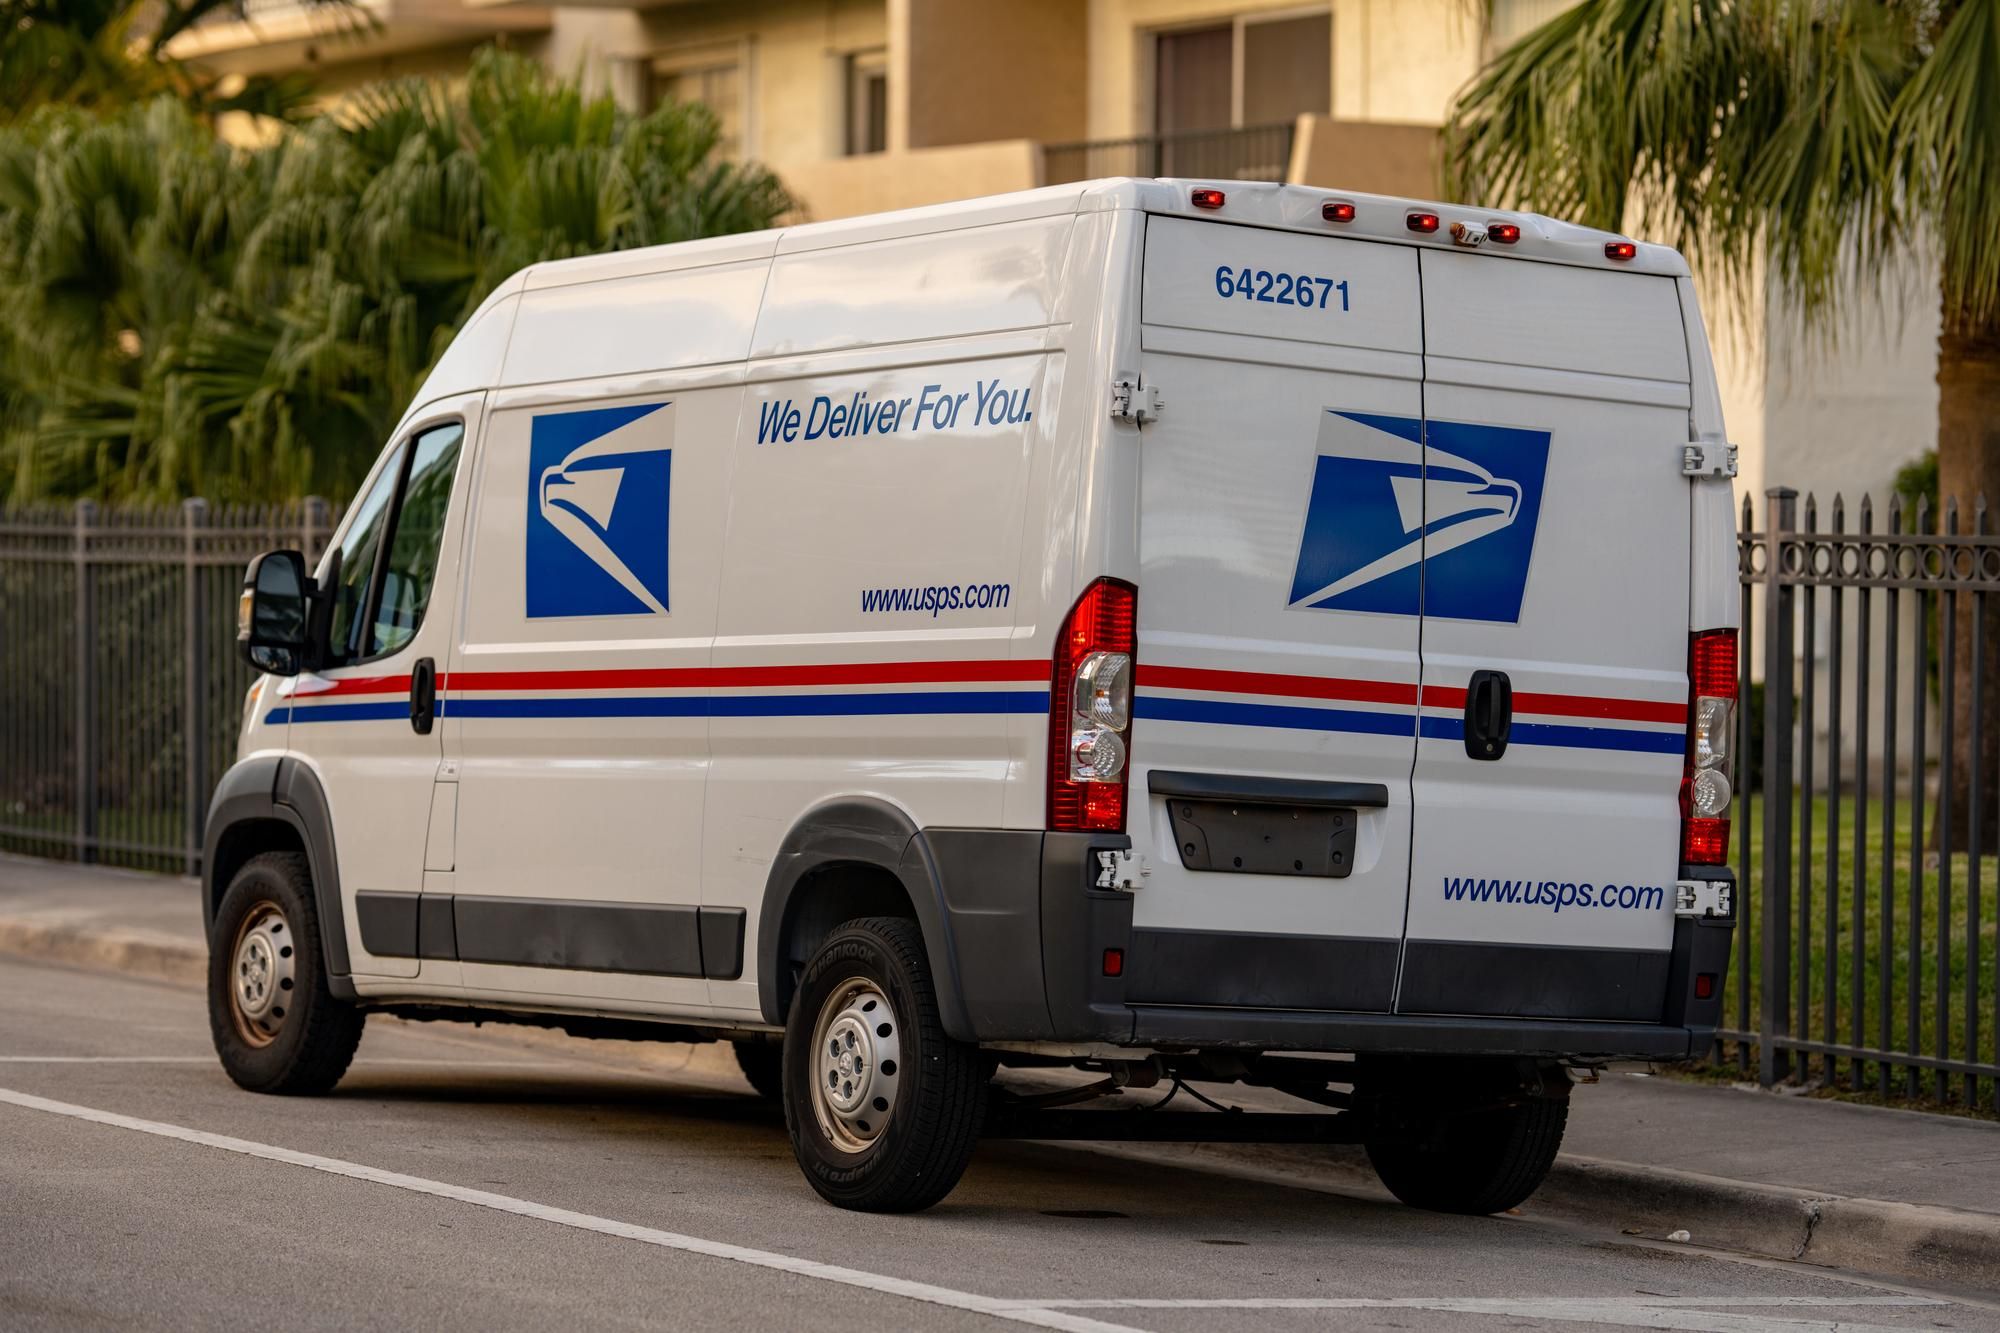 Investors claim electric vehicle maker made misleading claims about a USPS contract.